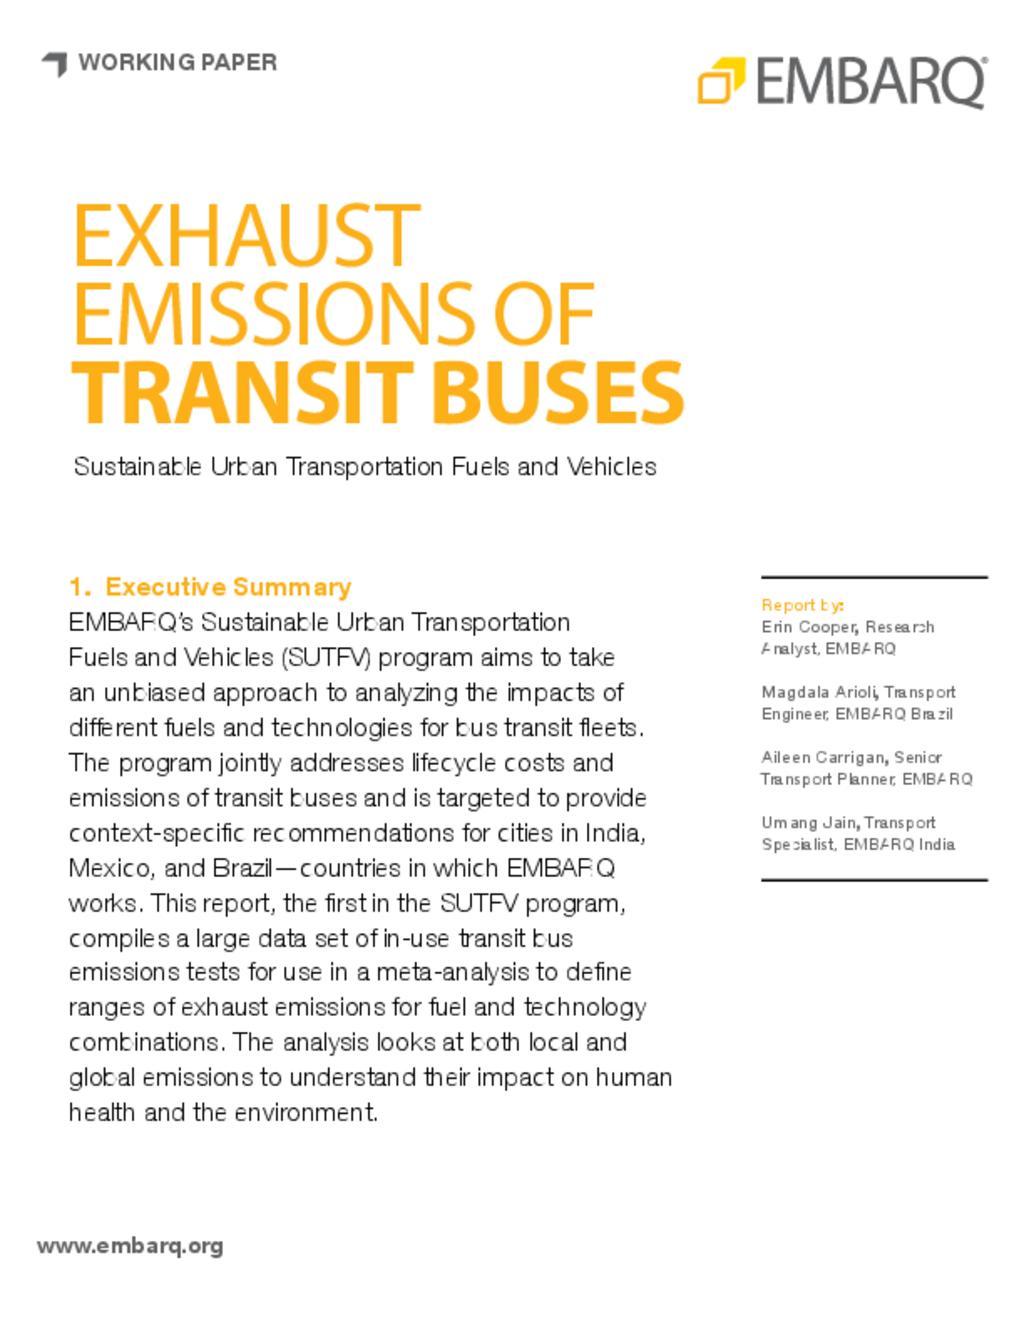 Exhaust Emissions of Transit Buses